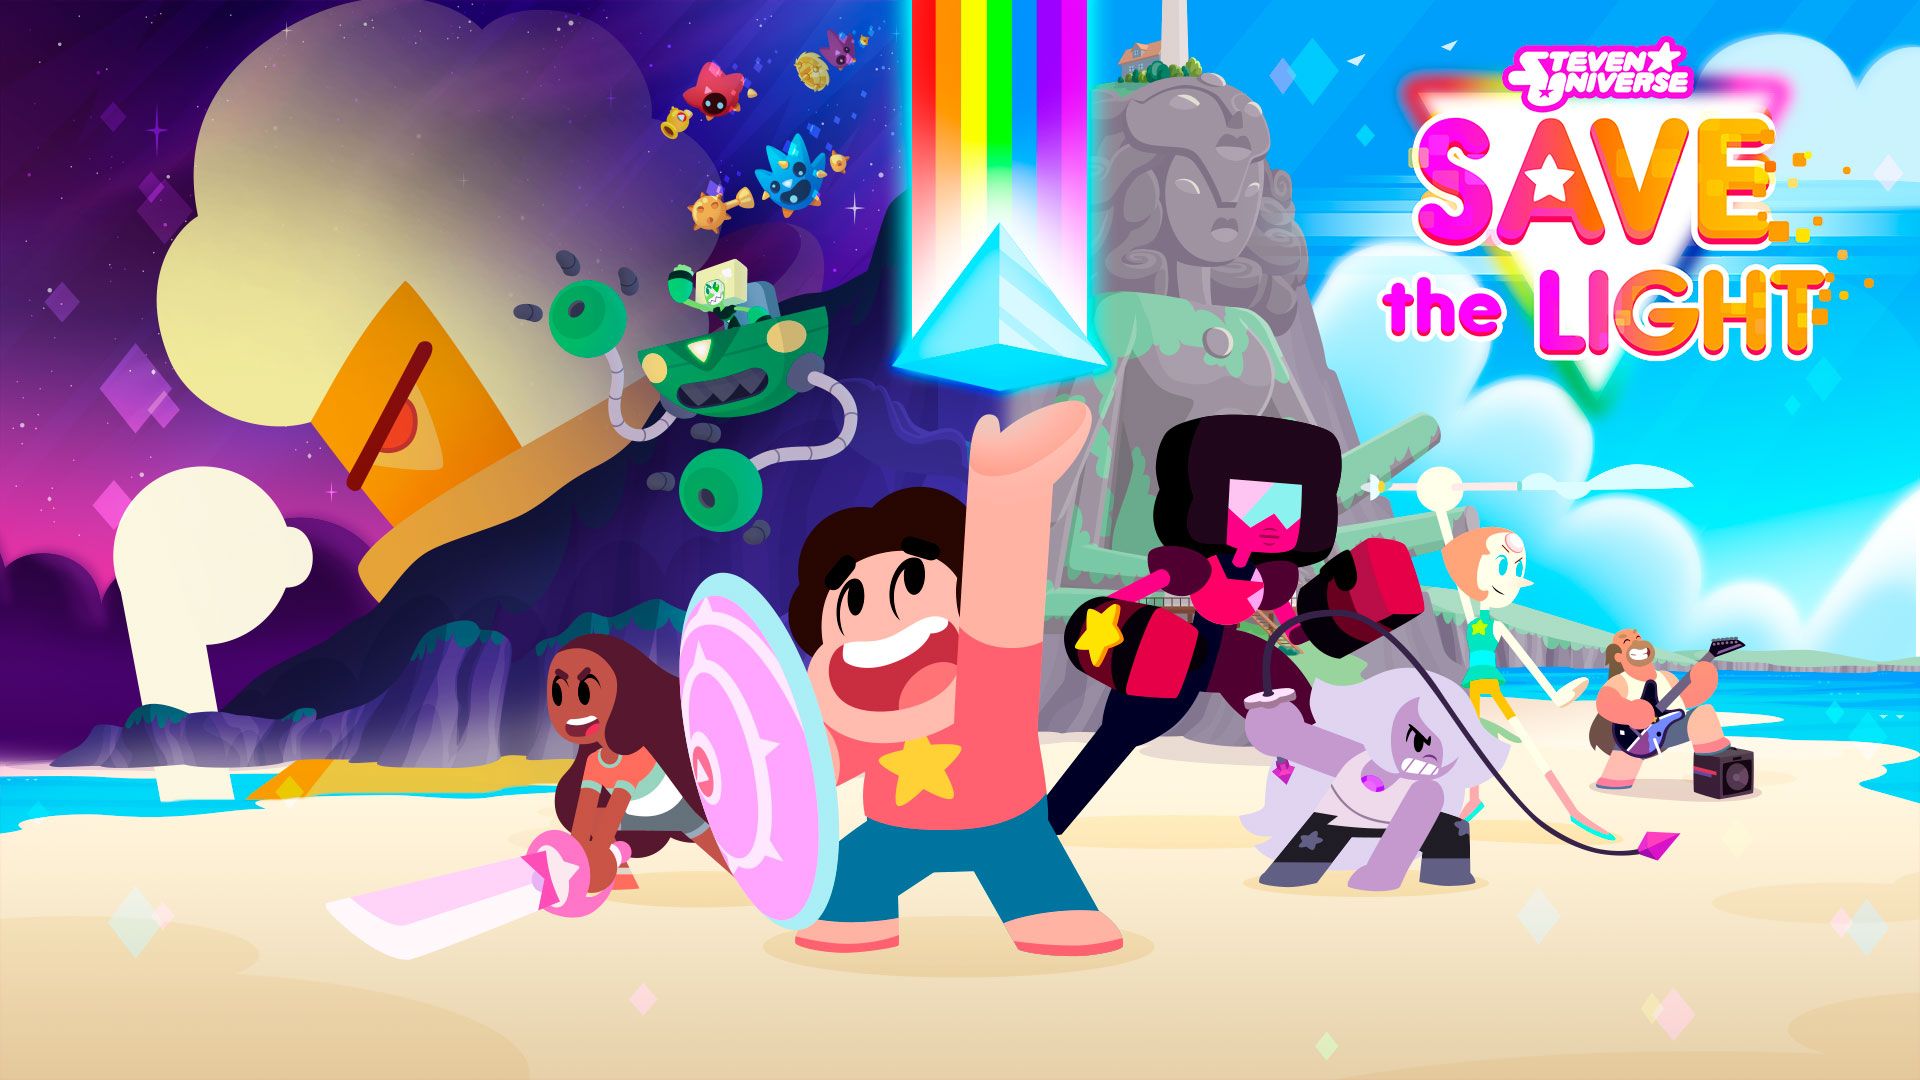 Steven Universe: Save the Light for Nintendo Switch Game Details